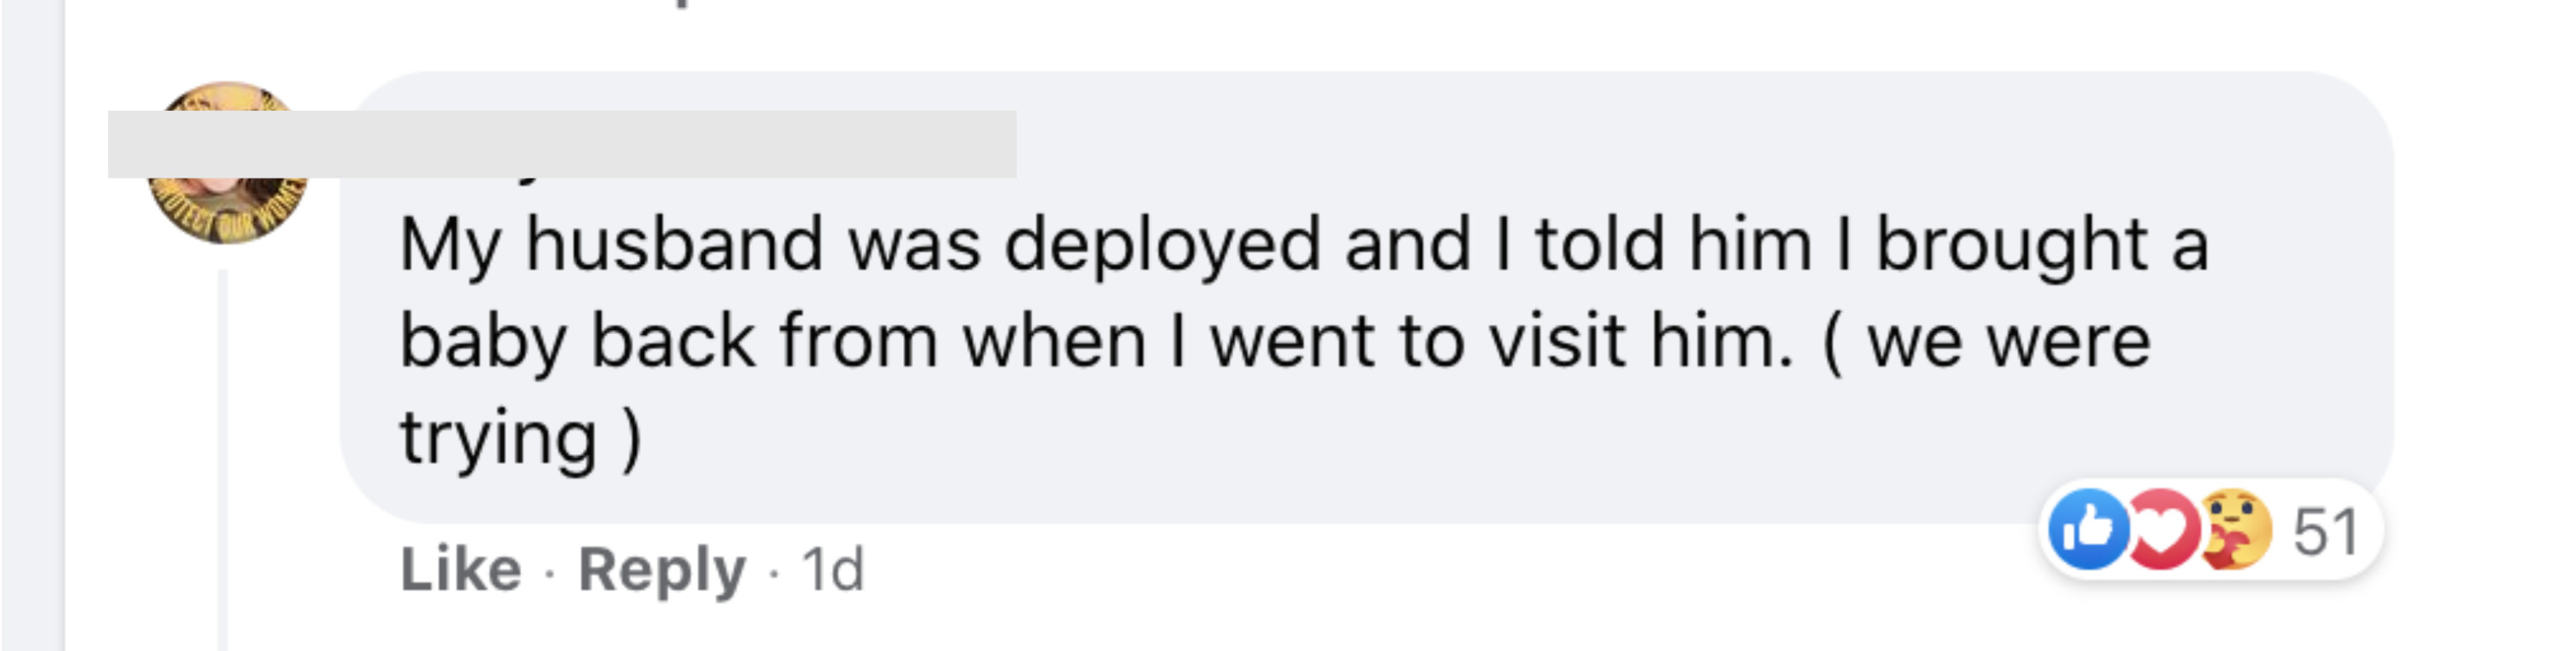 My husband was deployed and I told him I brought a baby back from when I went to visit him